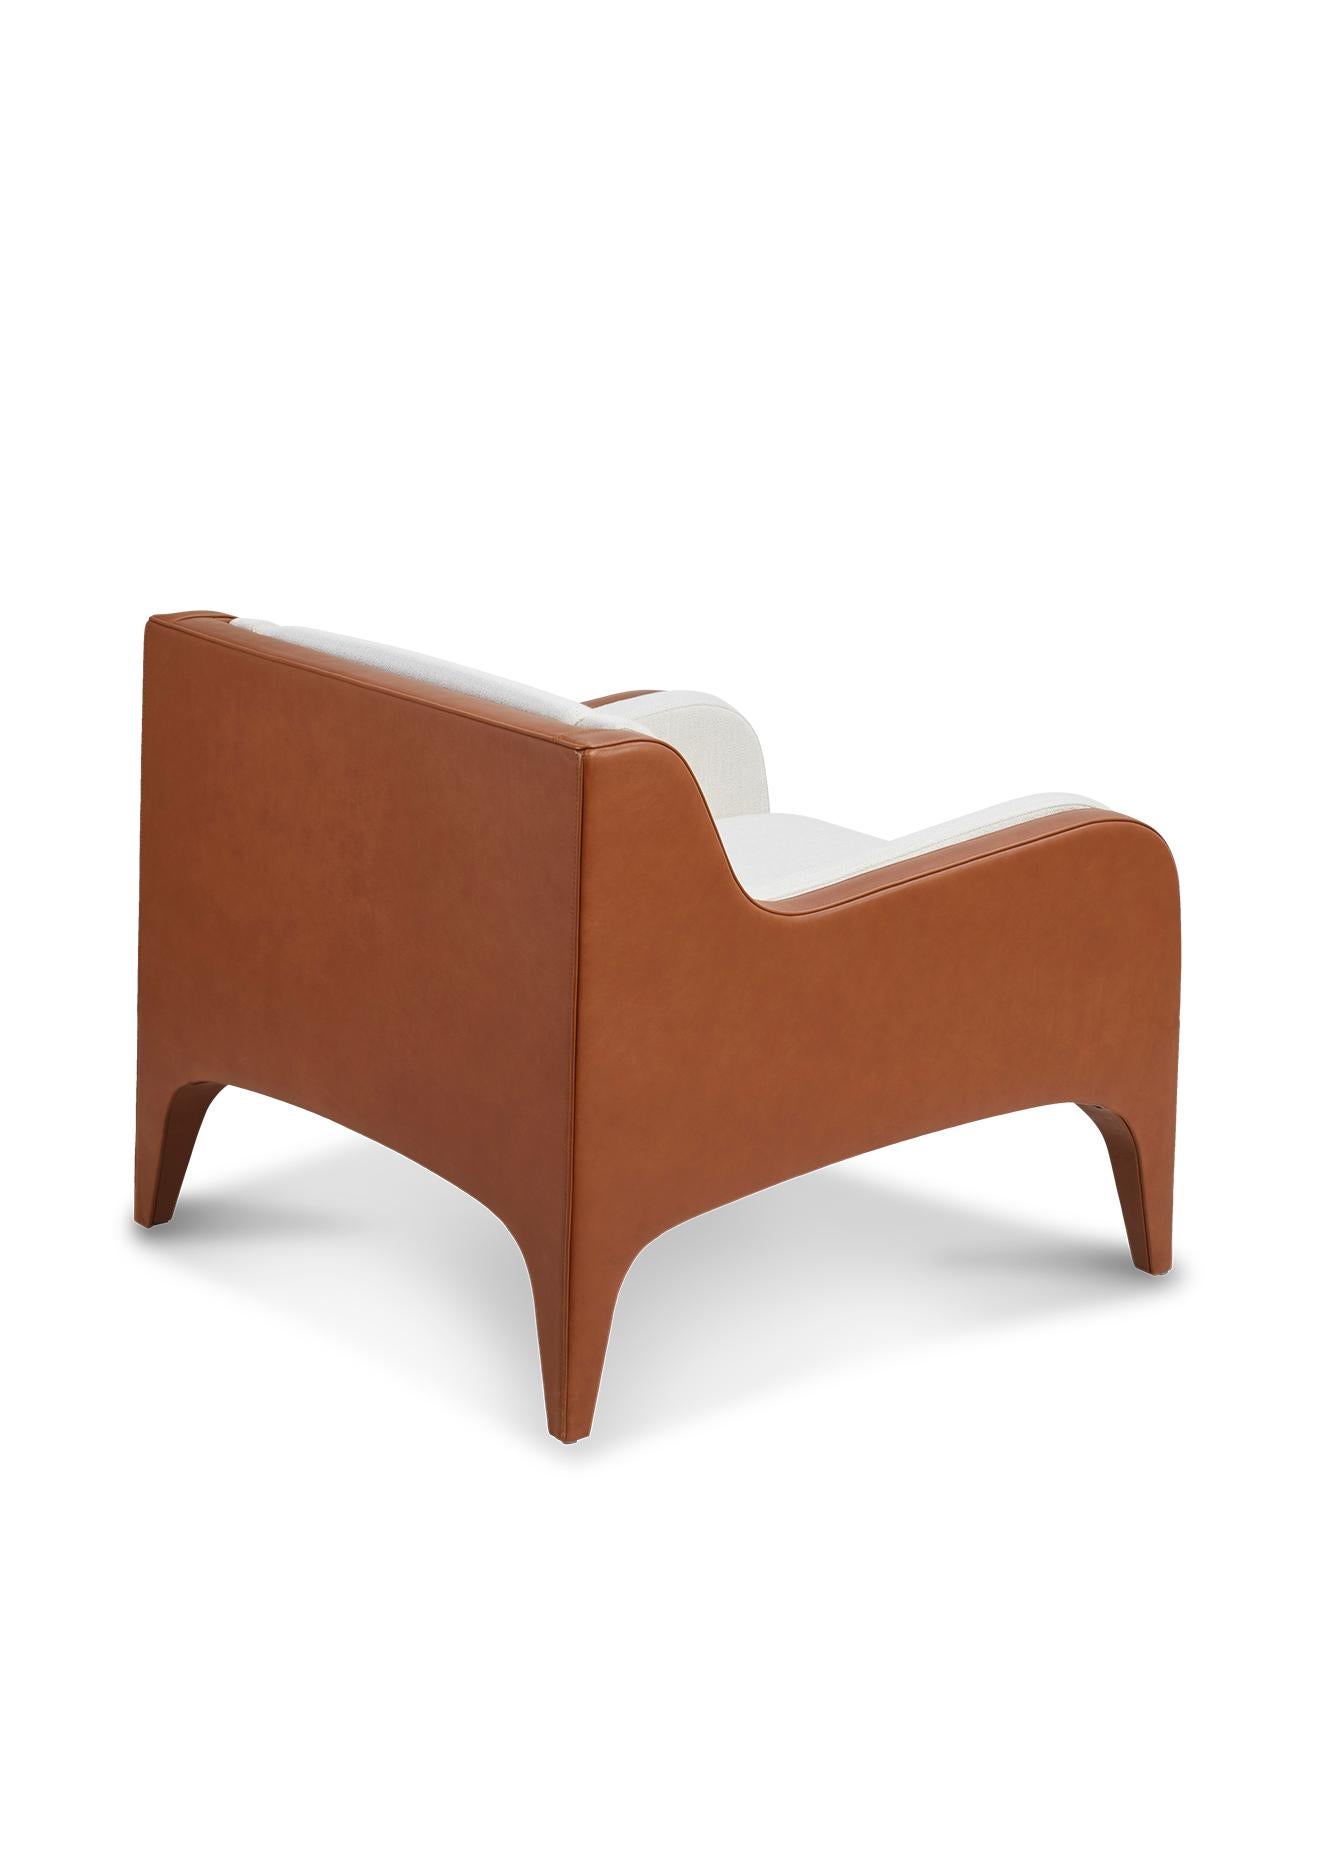 Contemporary Armchair SEASON by Reda Amalou Design - Tabac Leather For Sale